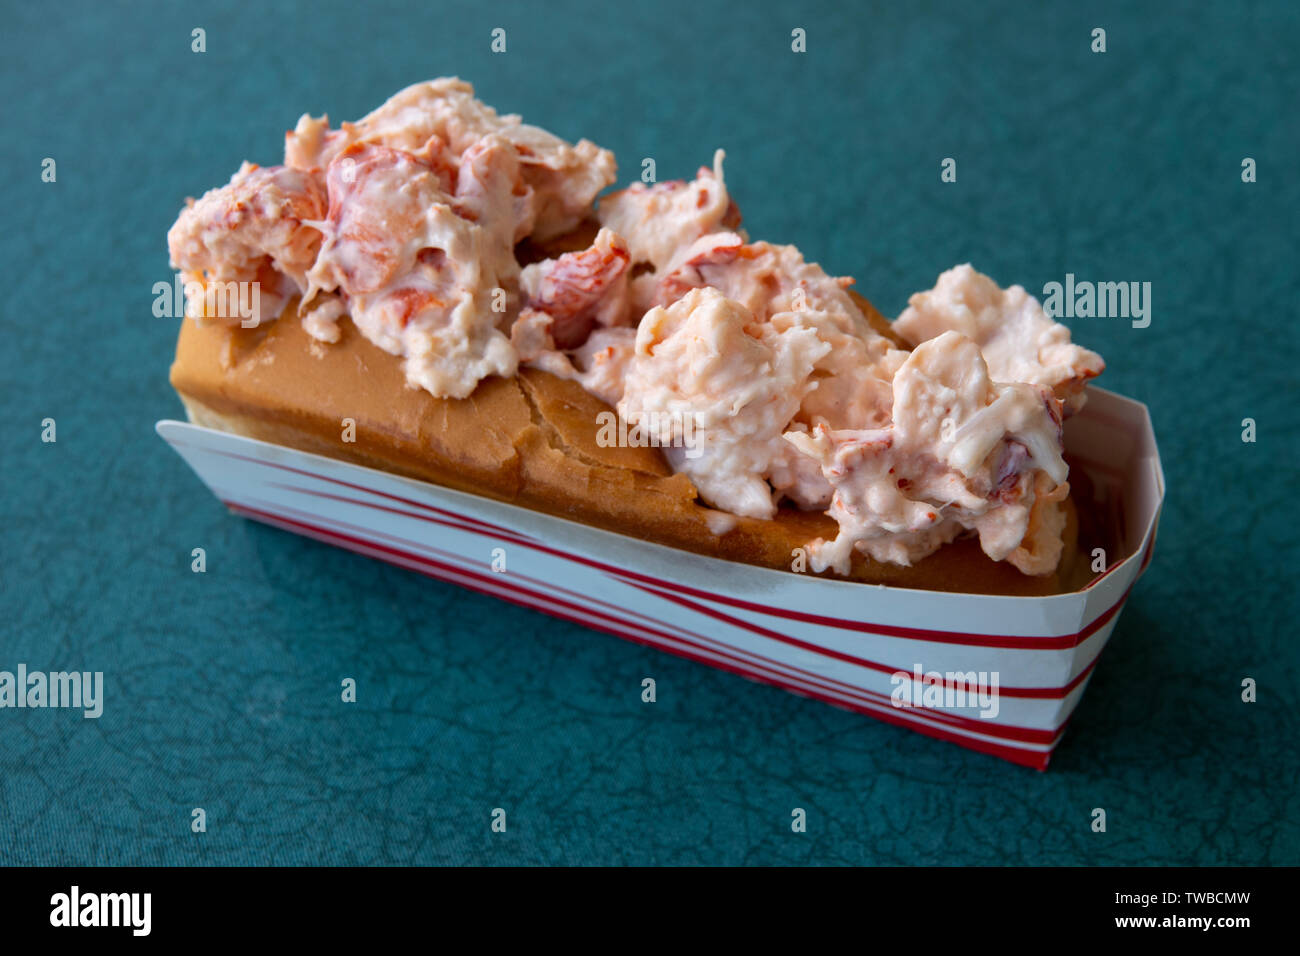 USA Plymouth MA Massachusetts Food Lobster Roll at the Lobster Hut Stock Photo